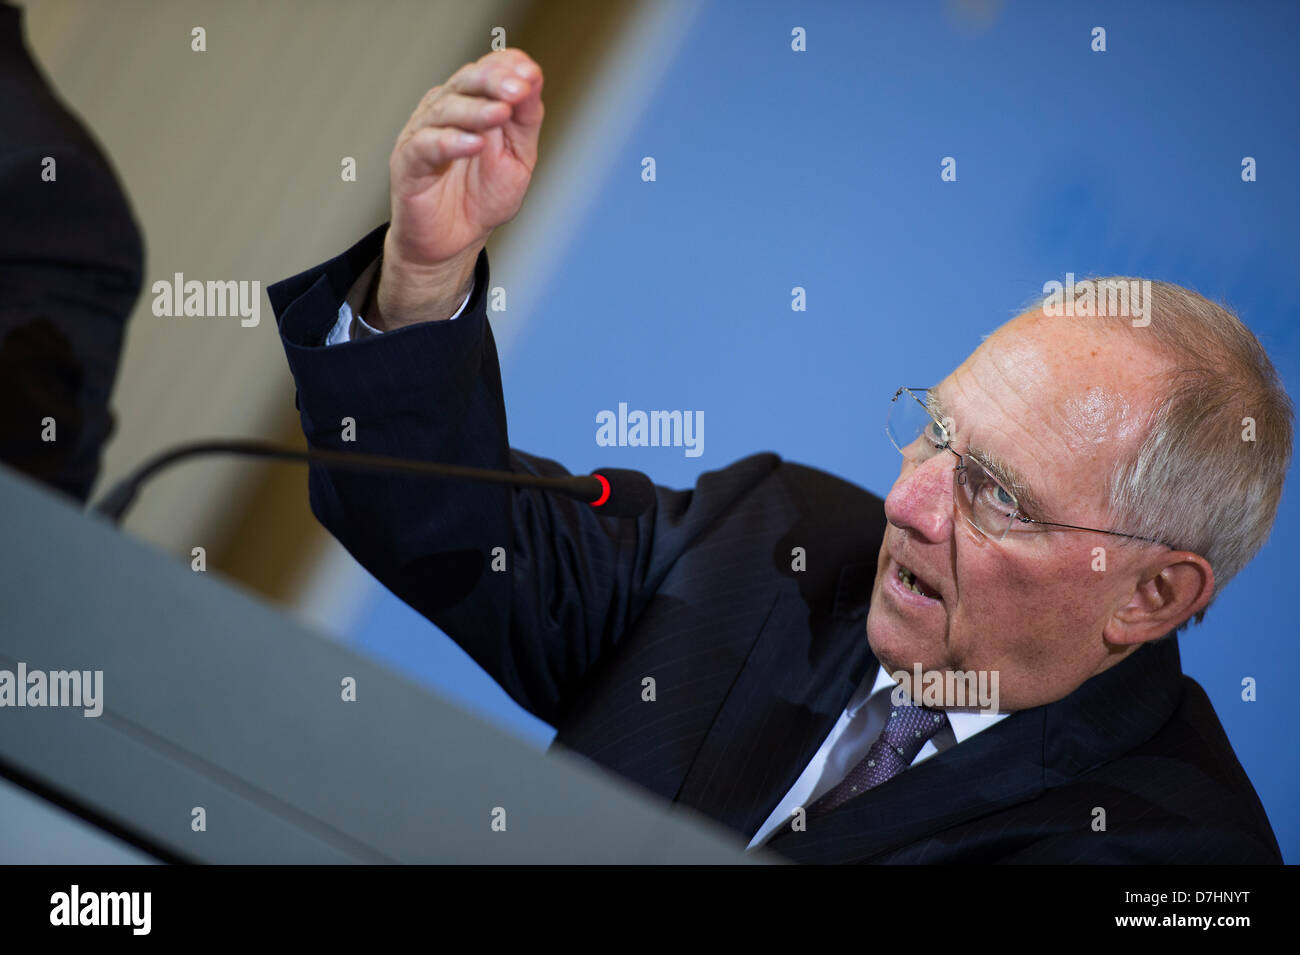 Germany, Berlin. May 8th 2013. Federal Minister of Finance, Wolfgang Schäuble holds a press conference on 2013 tax projections.  Credit Credit: Gonçalo Silva/Alamy Live News. Stock Photo